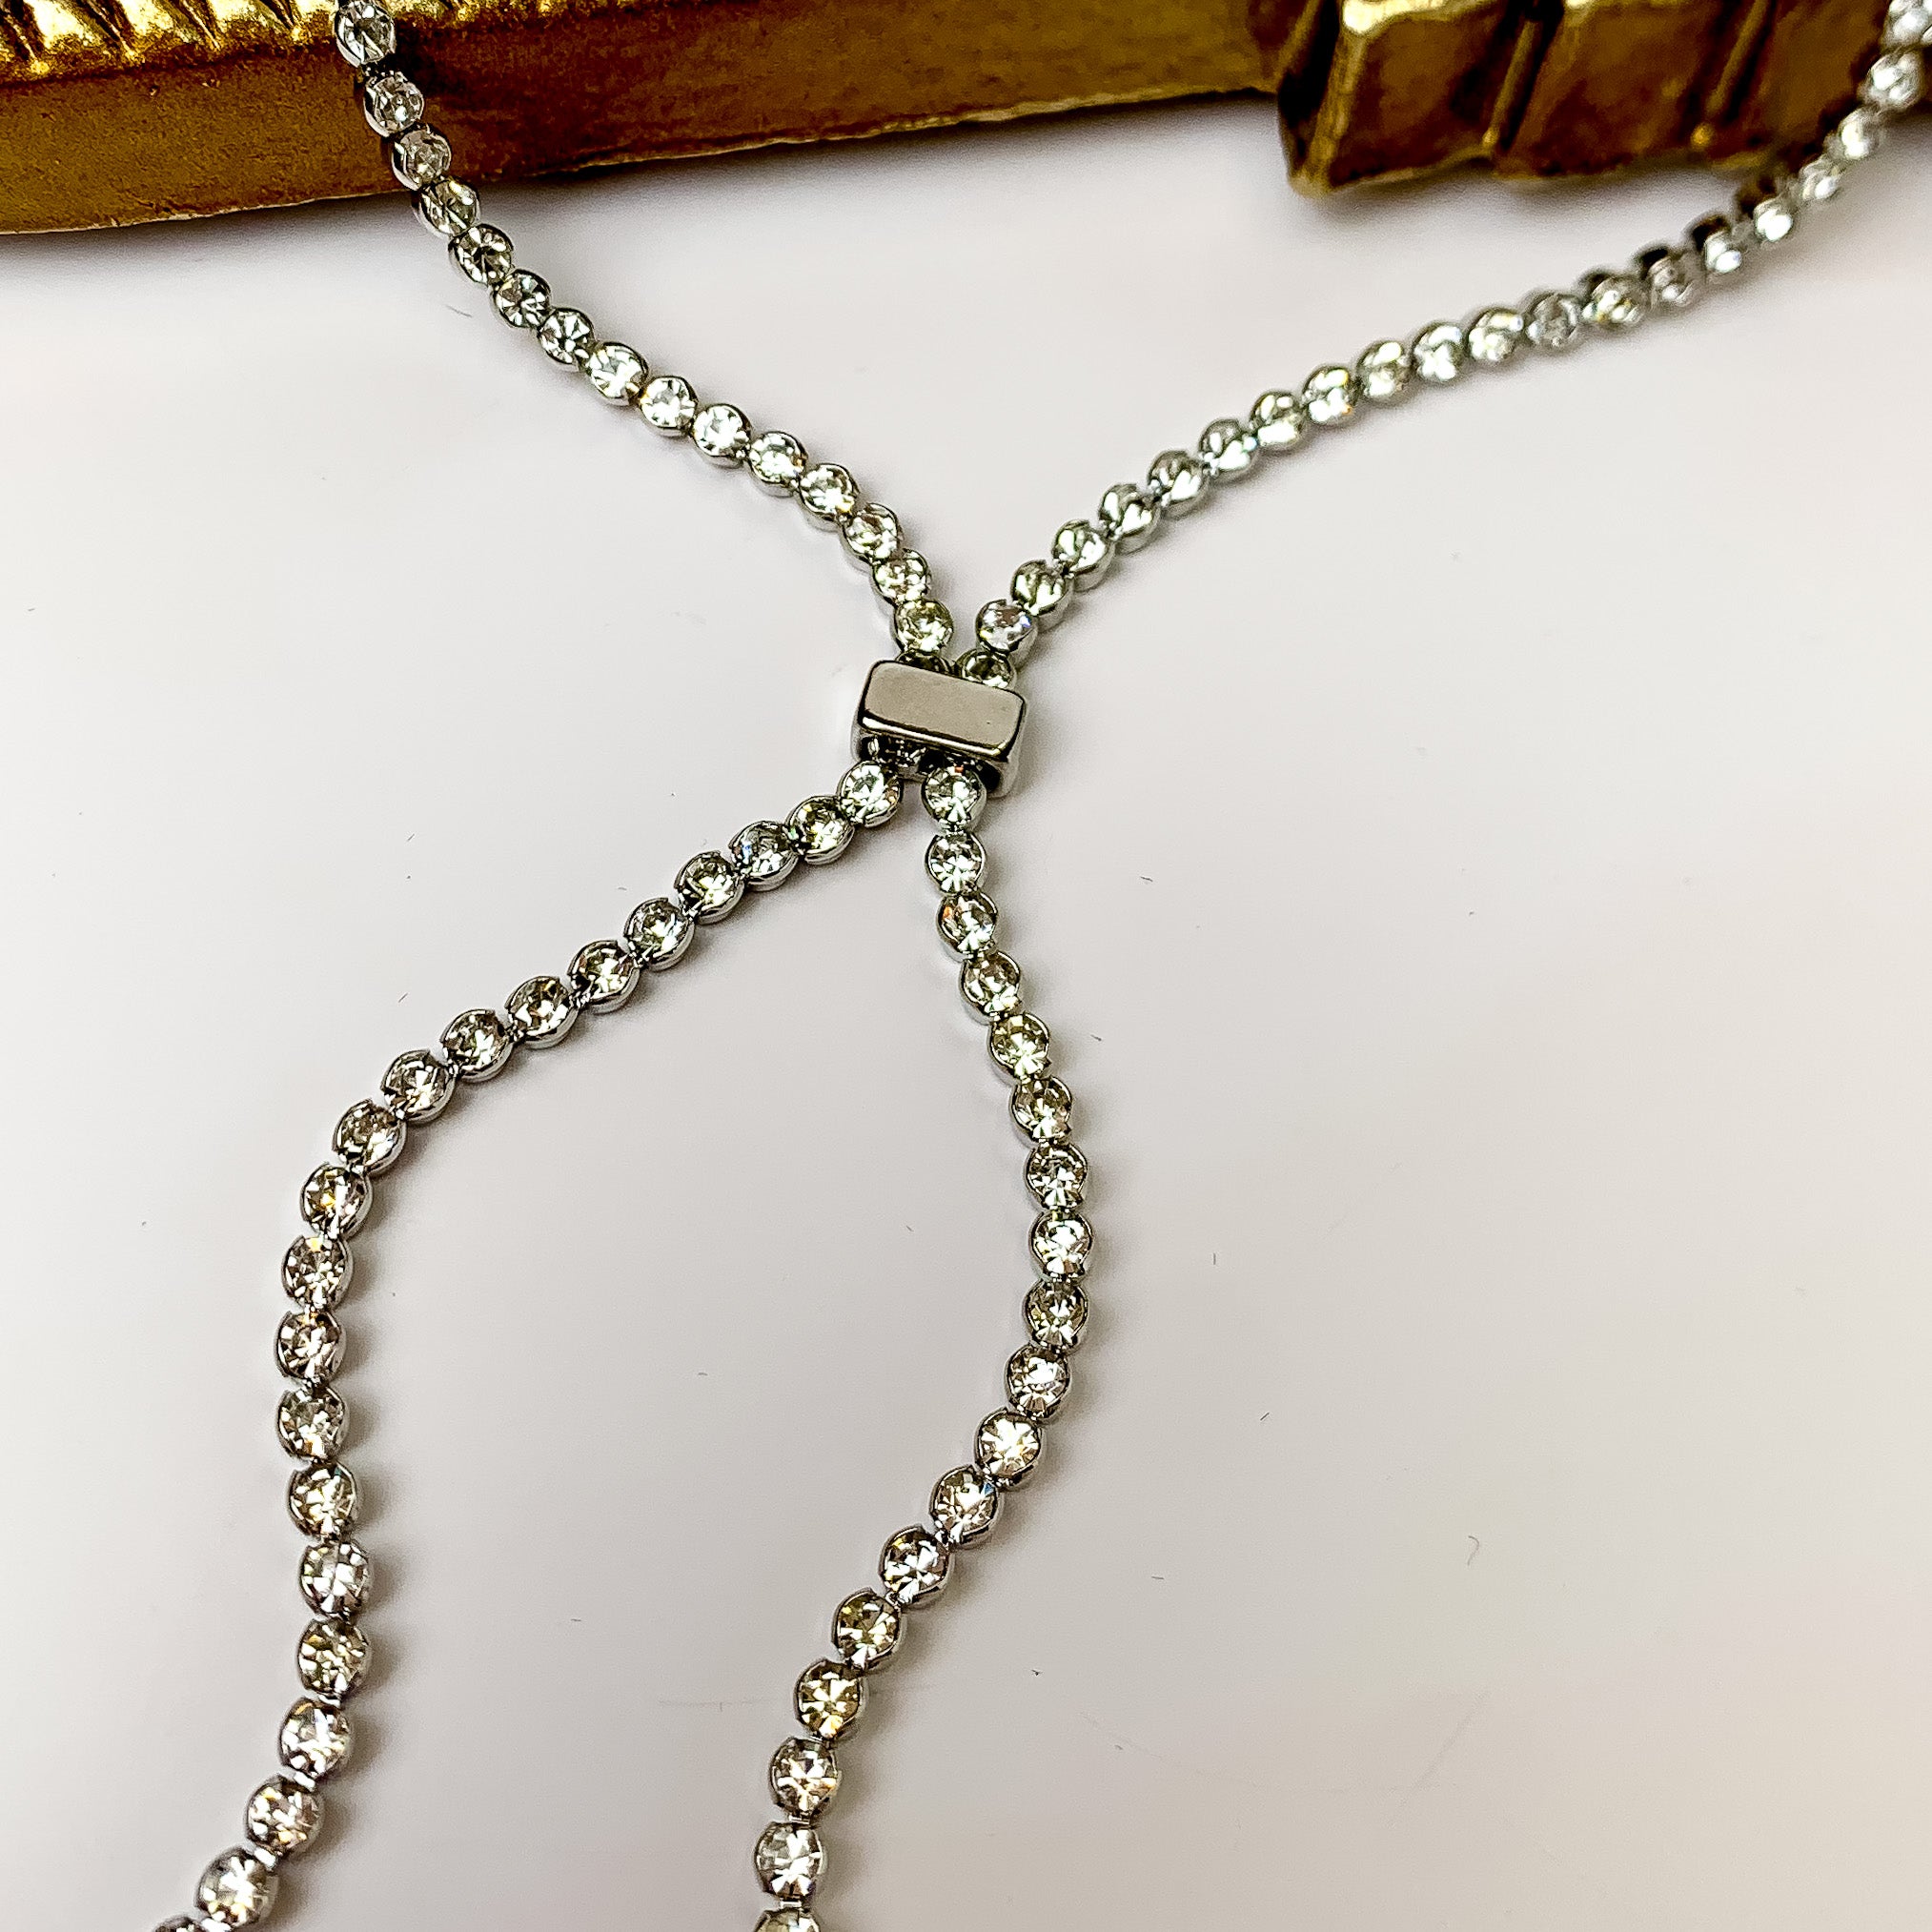 Glamorous Silver Tone Y Necklace With Clear Crystals - Giddy Up Glamour Boutique